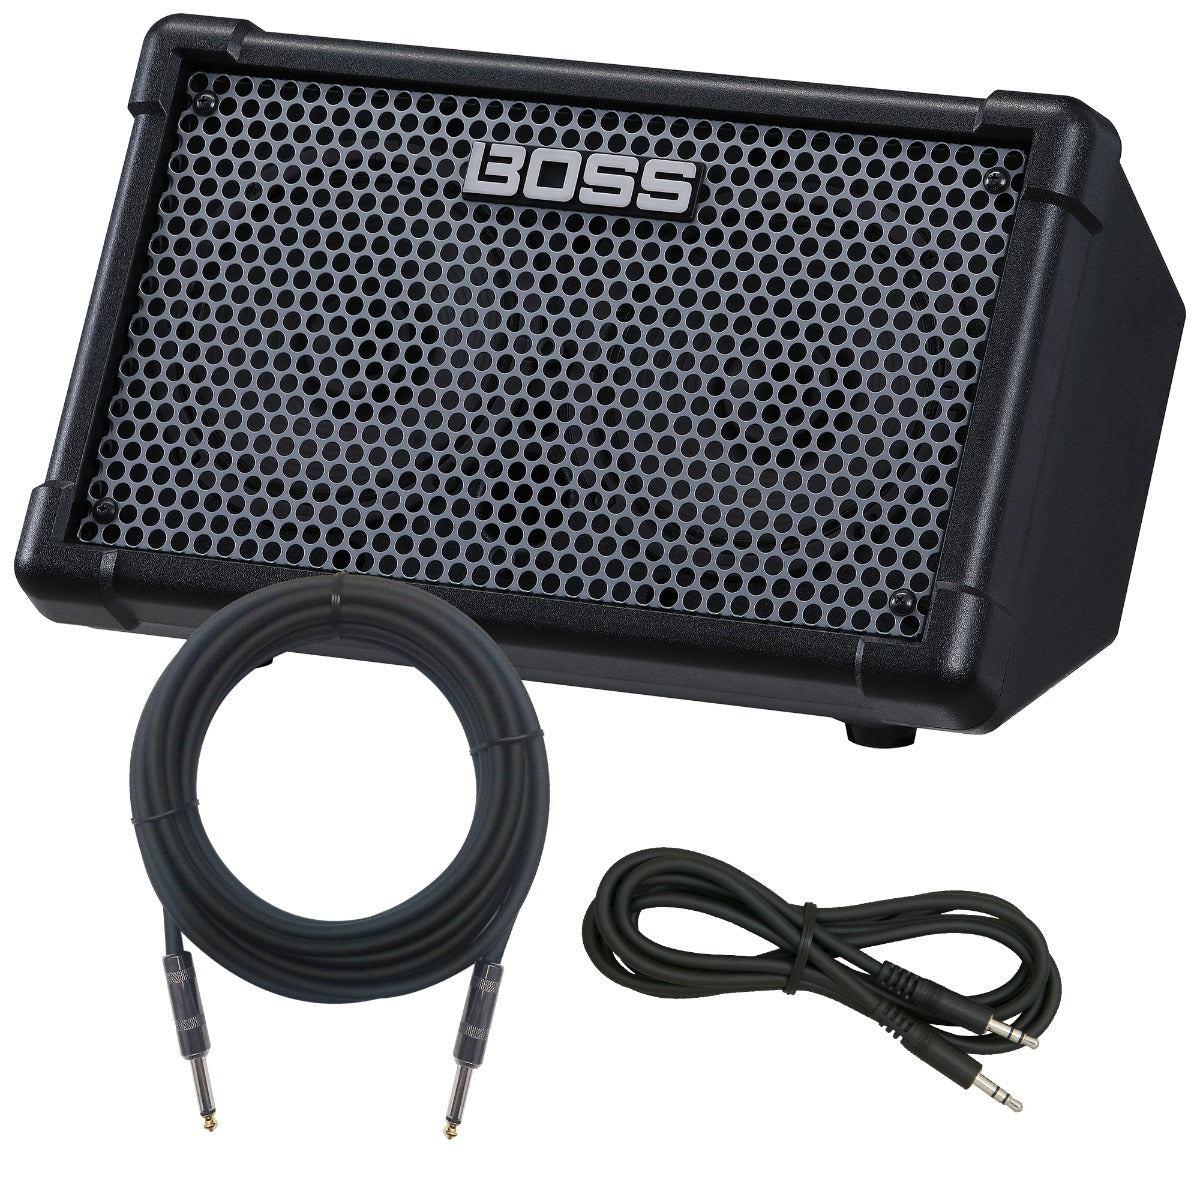 Boss Cube Street II Battery-Powered Stereo Amplifier - Black CABLE KIT